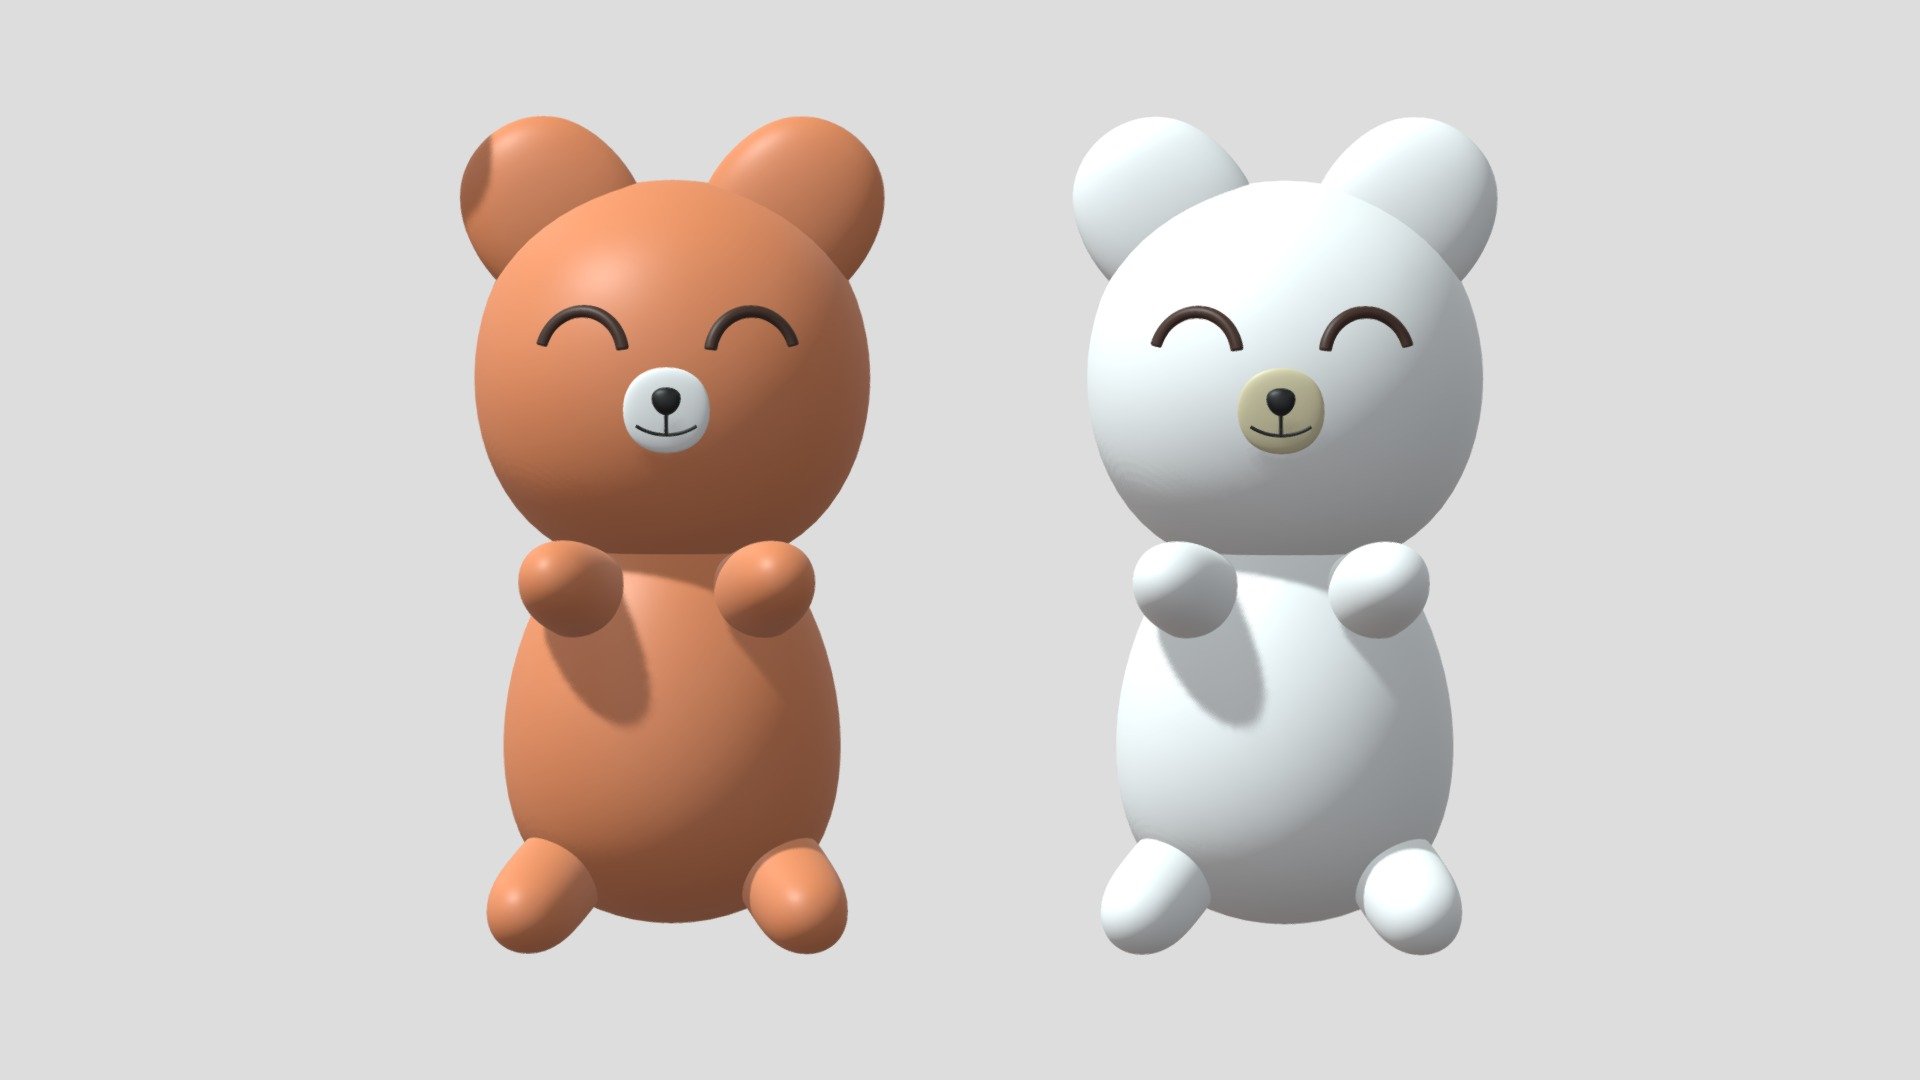 -Cartoon Cute Bear.

-This product contains 14 objects.

-Low poly : Verts : 6,364 Faces : 6,264

-Mid Poly : Verts : 9,820 Faces : 9,720.

-High Poly : Verts : 21,308 Faces : 21,208.

-Materials have the correct names.

-This product was created in Blender 2.935.

-Formats: blend, fbx, obj, c4d, dae, abc, stl, glb, unity.

-We hope you enjoy this model.

-Thank you 3d model